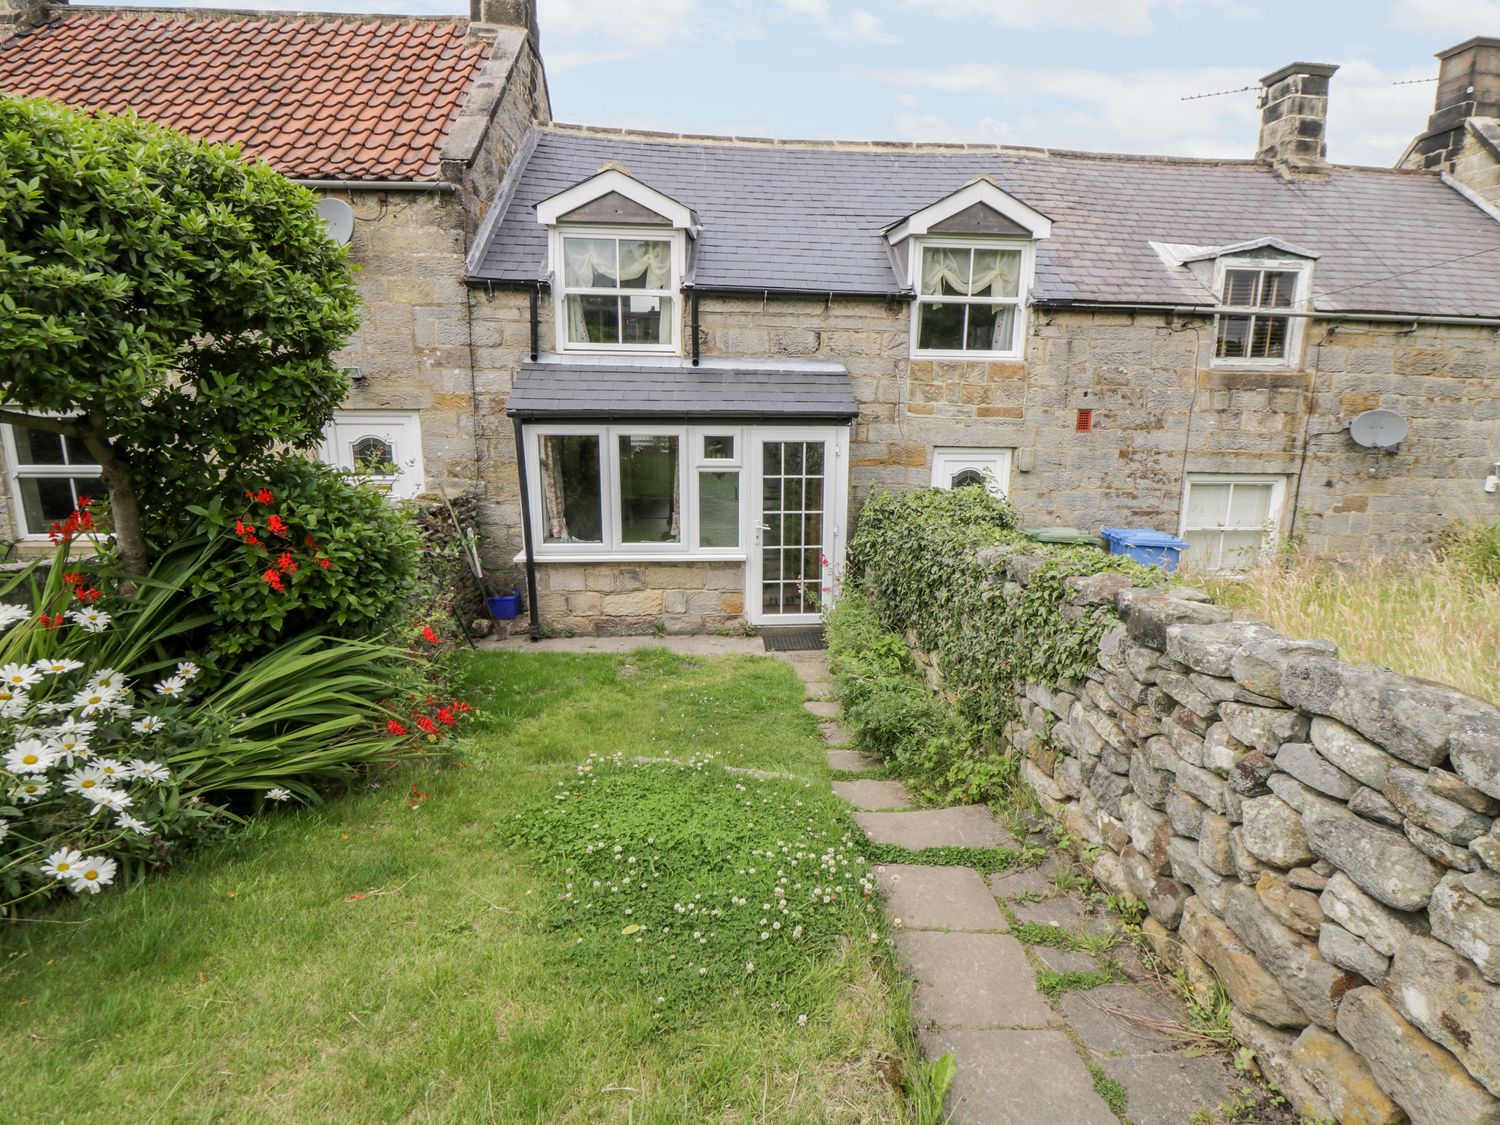 7 Lilac Terrace - North Yorkshire (incl. Whitby) - 1044845 - photo 1